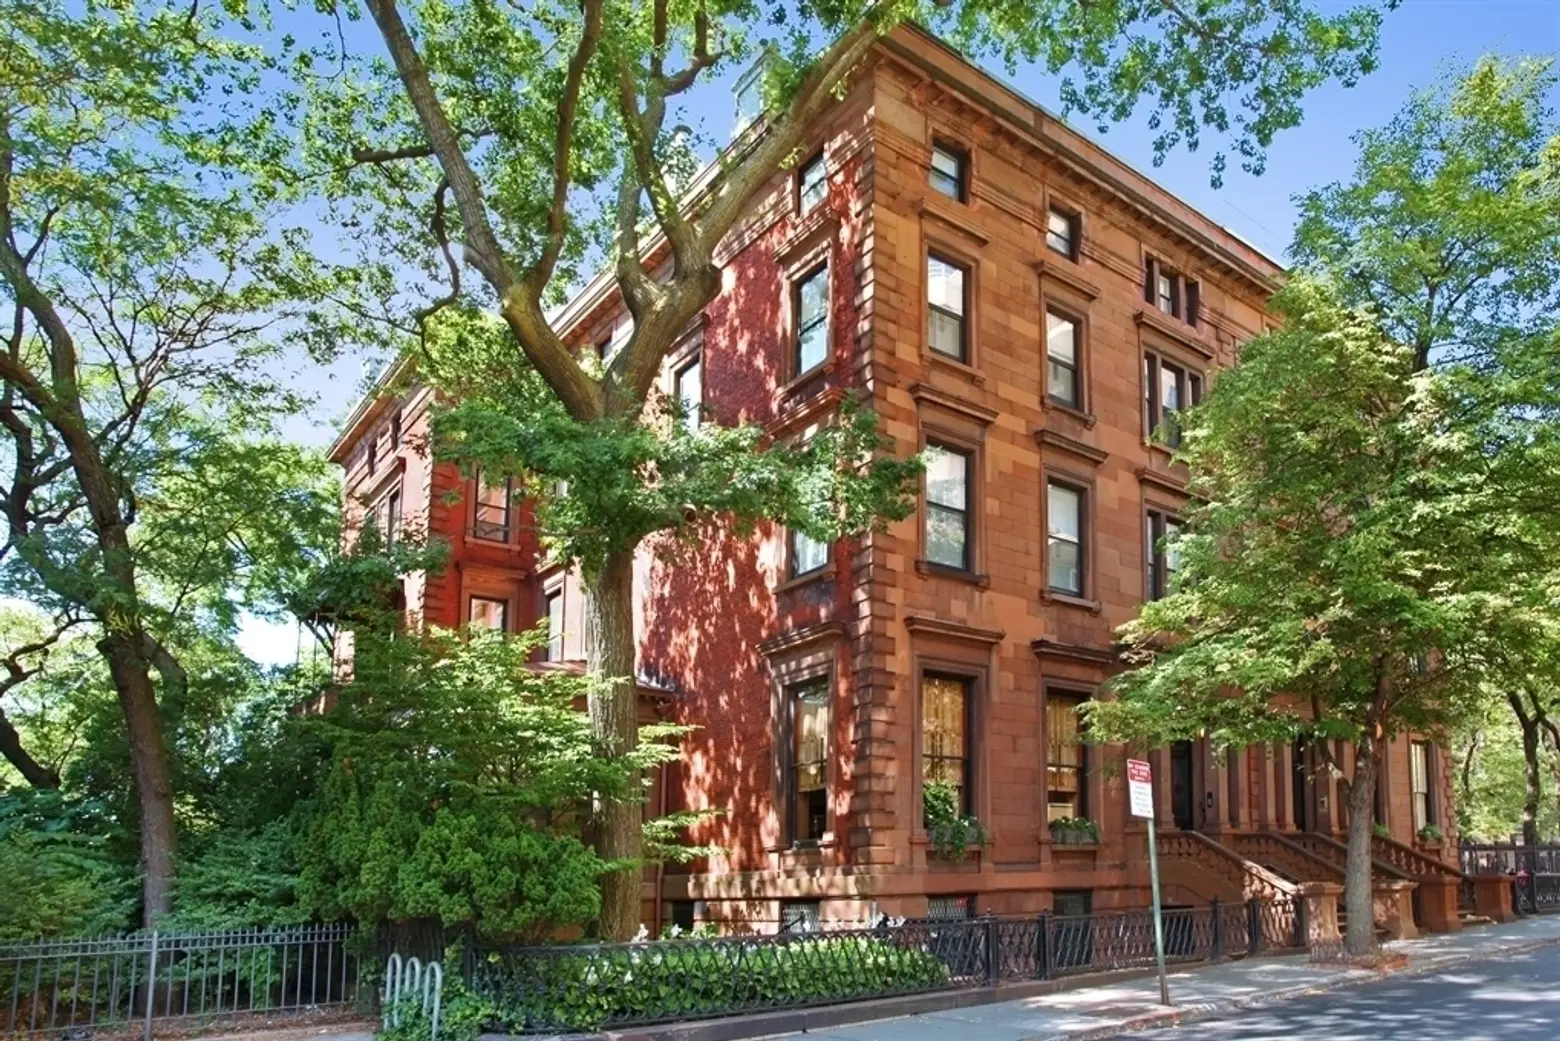 $40M Brooklyn Heights townhouse with a mayoral past is now four pricey rentals